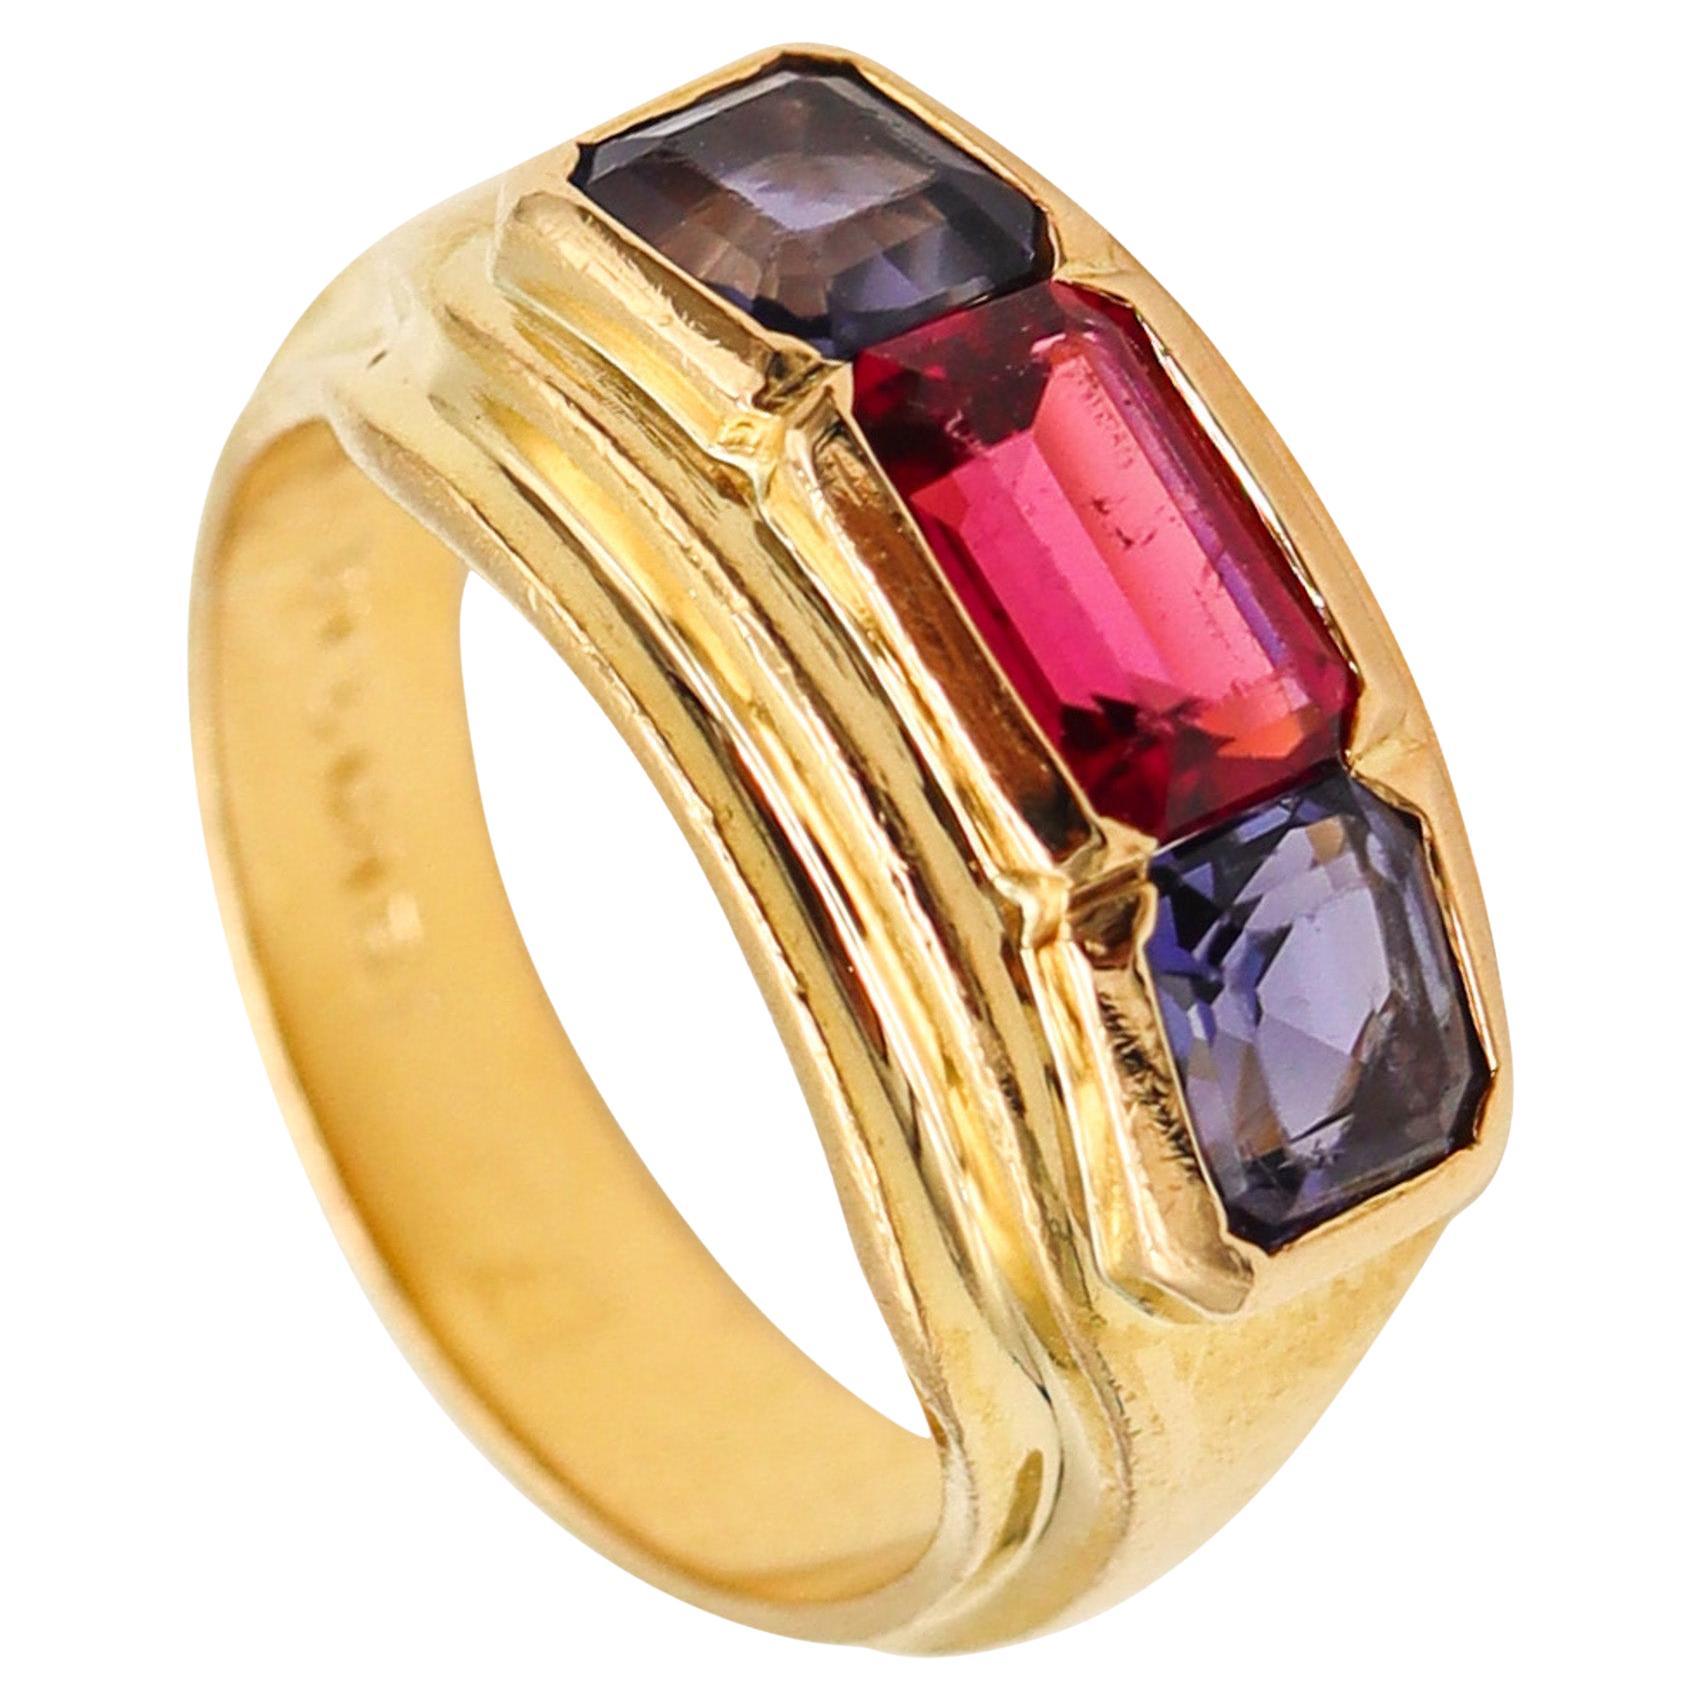 Bvlgari France Three Gems Ring In 18Kt Gold With 2.18 Ctw In Tourmaline & Iolite For Sale